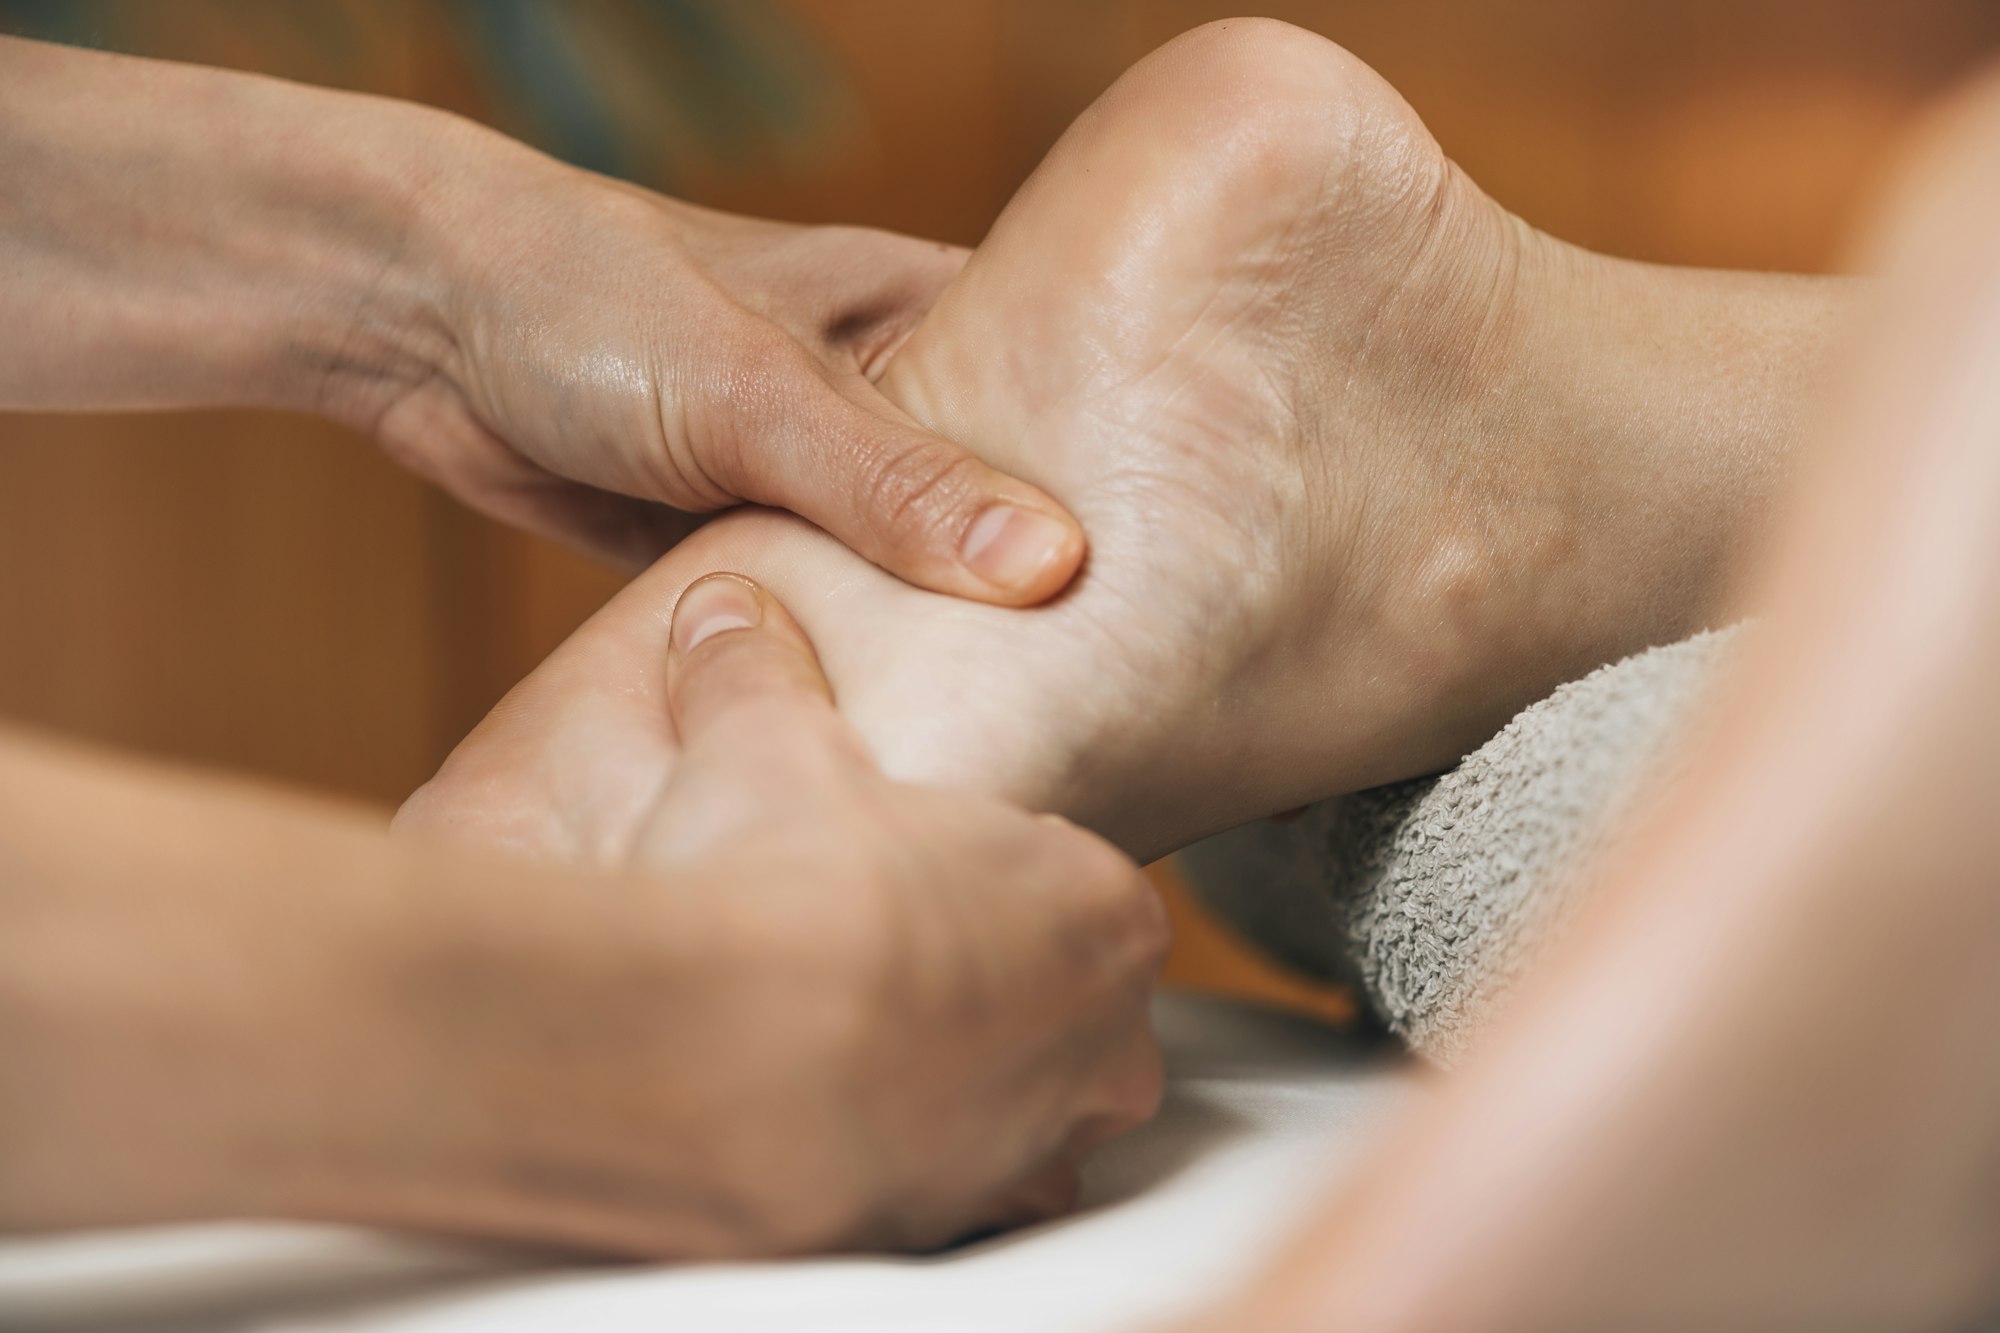 The Many Benefits of Massage for Neuropathy